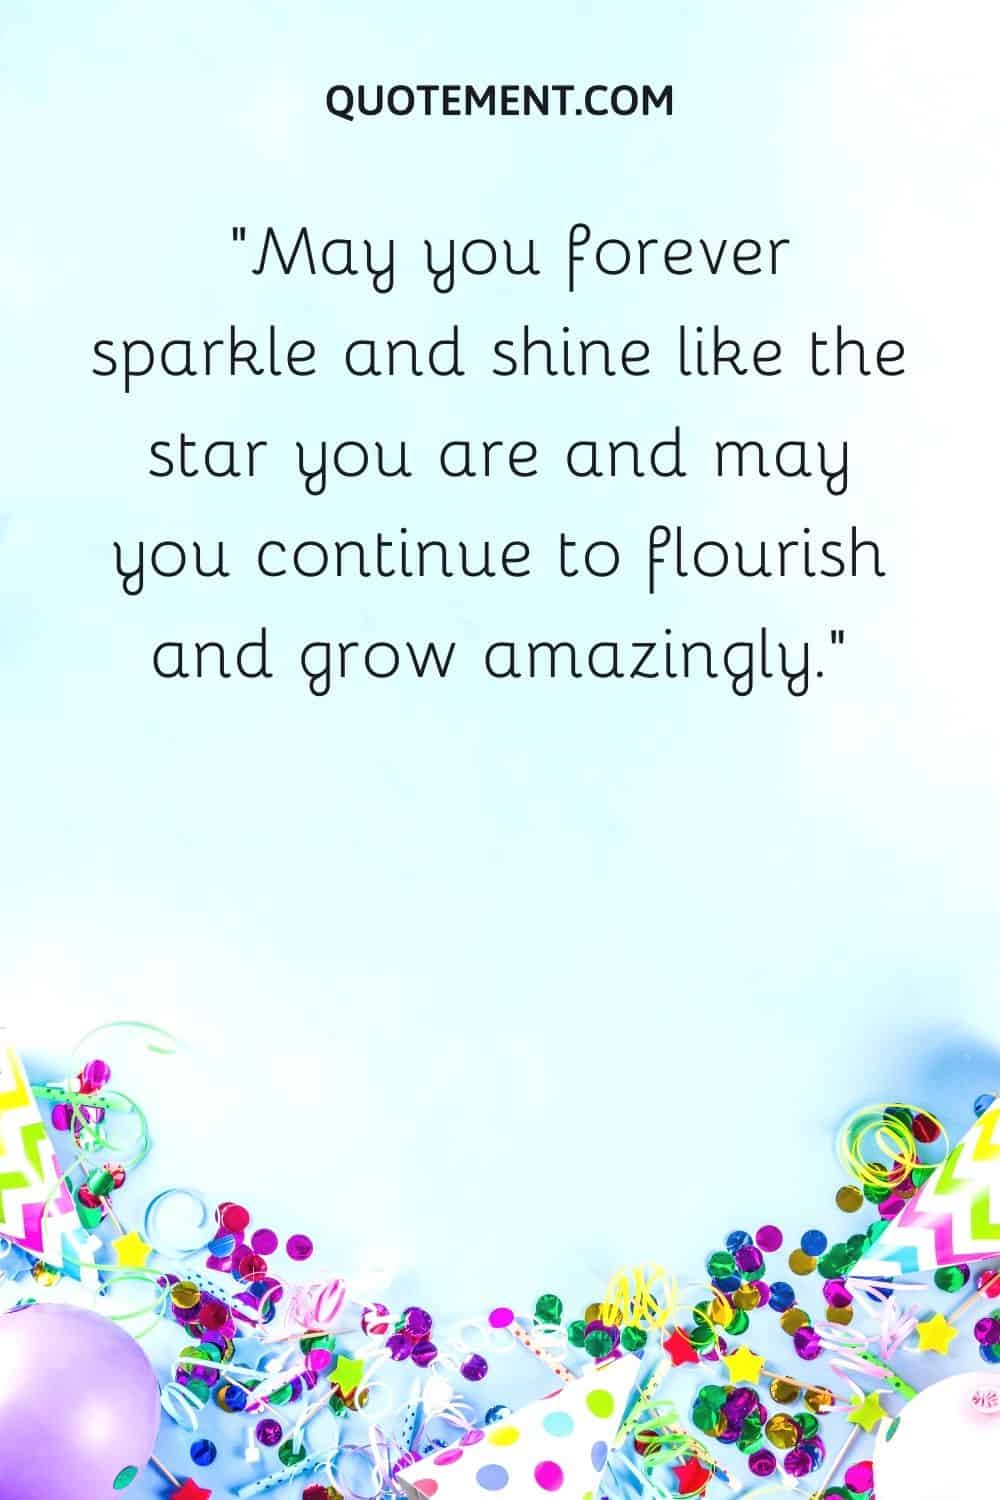 May you forever sparkle and shine